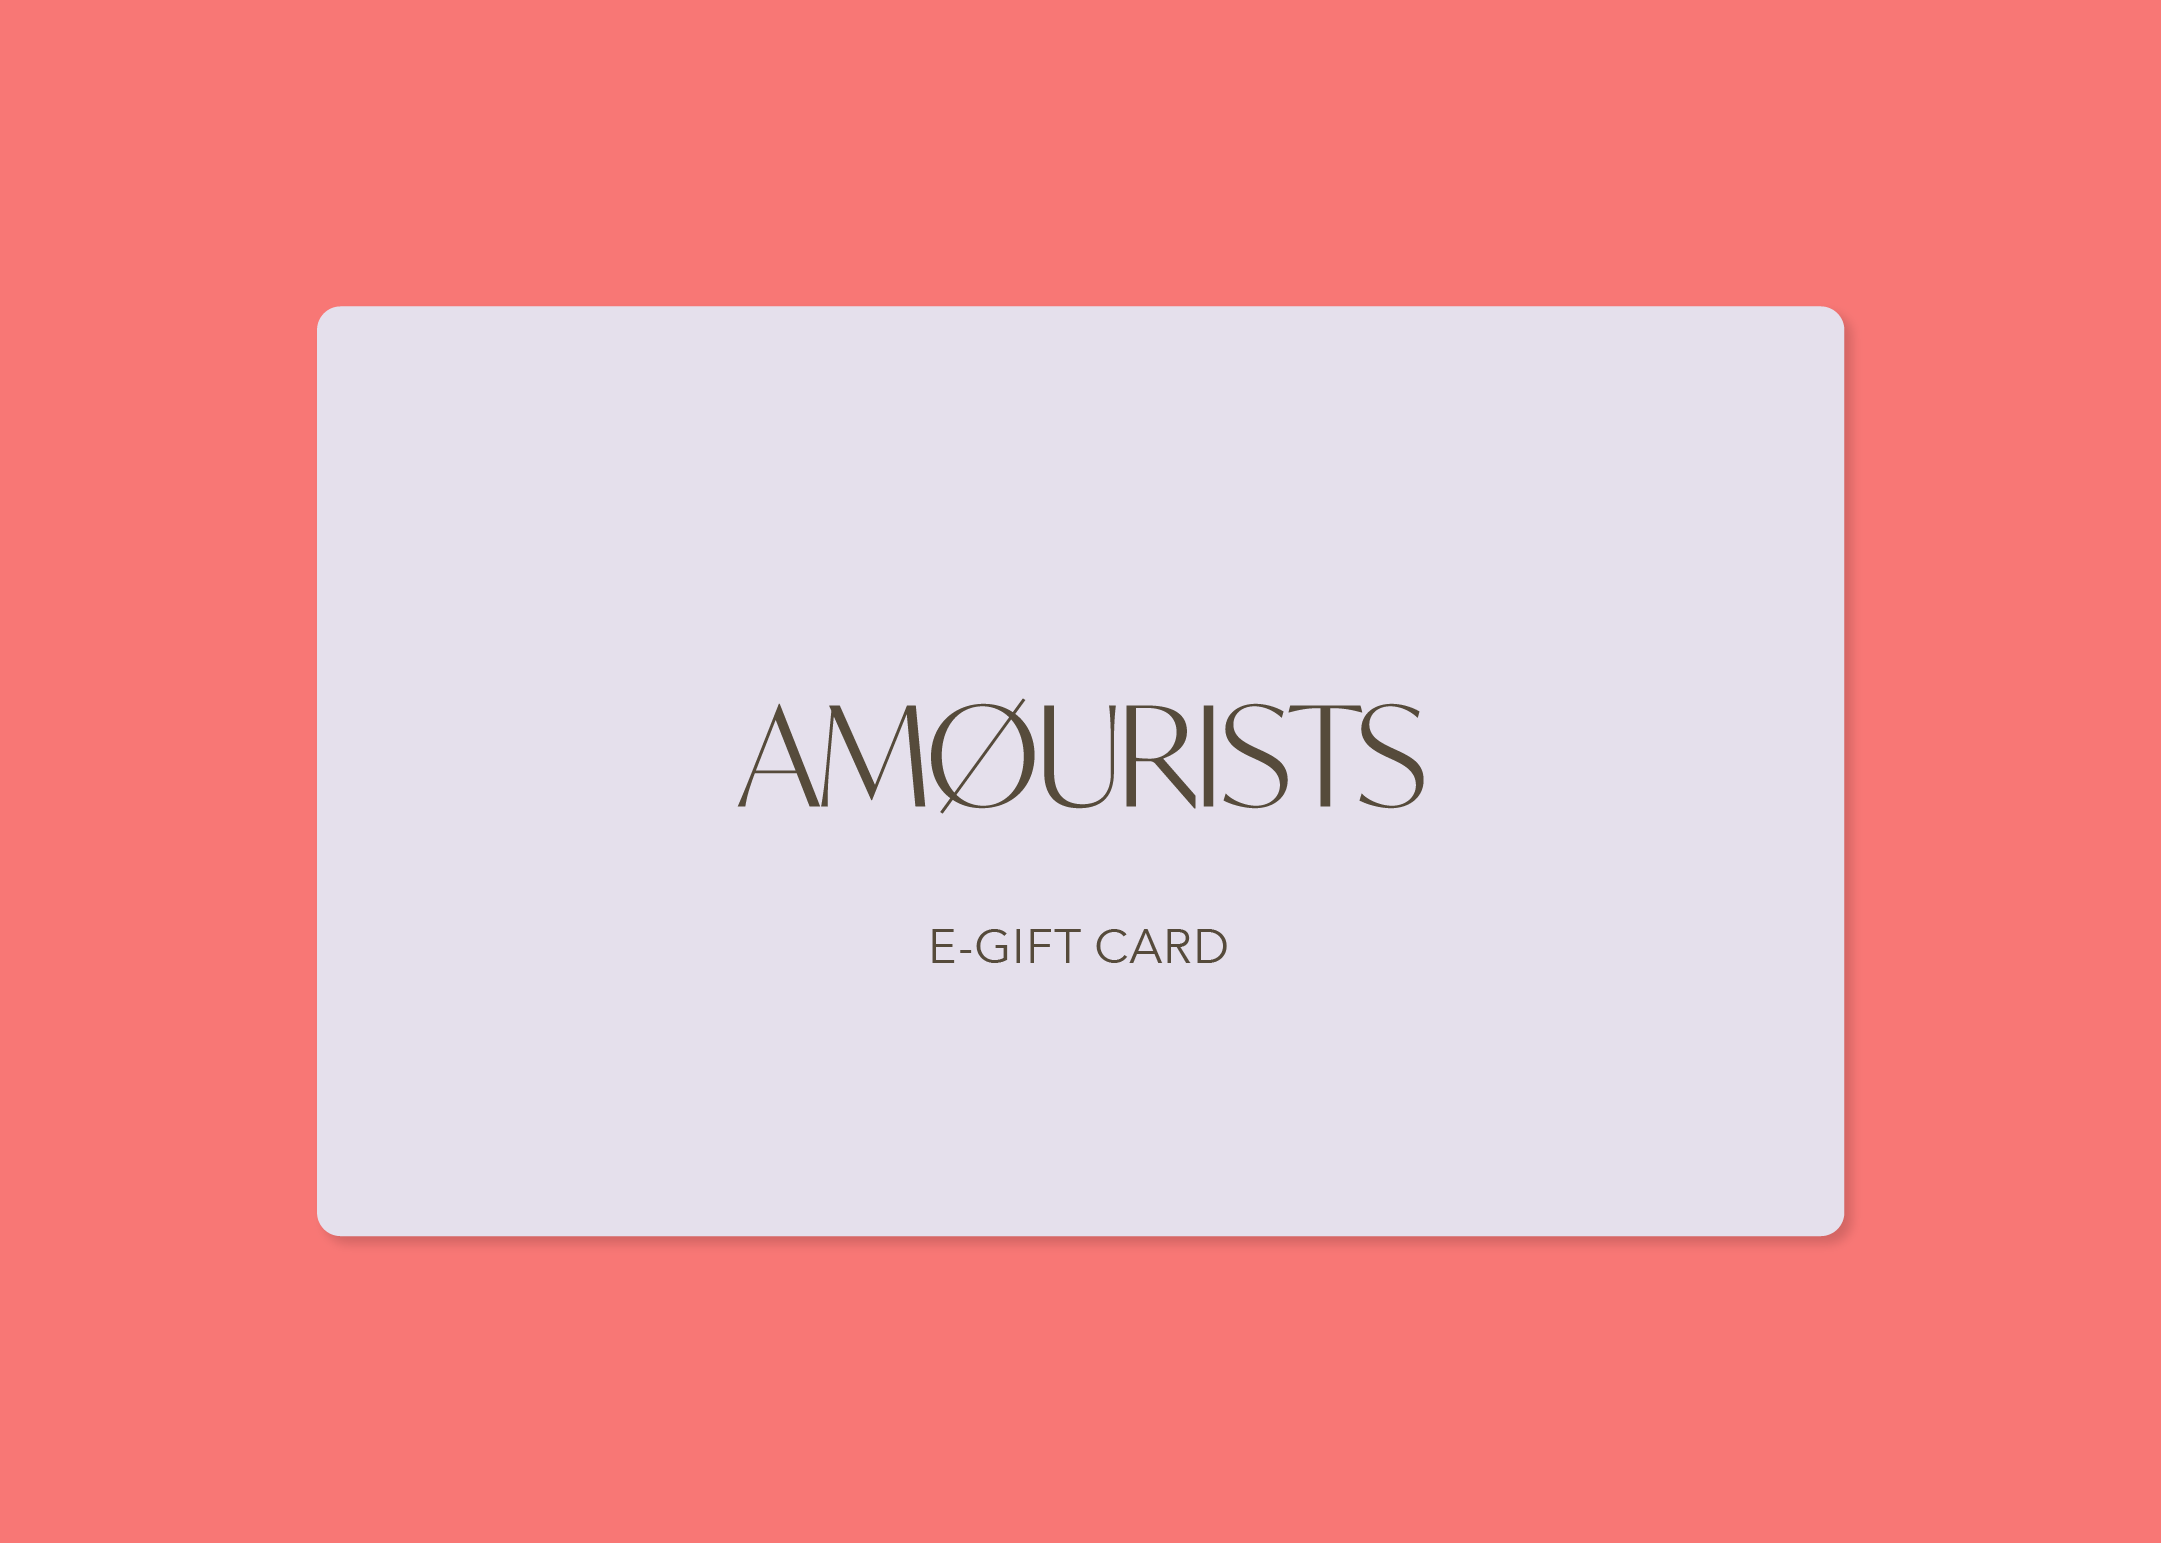 E-Gift Cards peach background- Pearl Medium Drop Hoop Earrings on Amourists eco Pouch - Gold plated, waterproof, tarnish-free, and long-lasting. Packaged in eco-friendly materials.